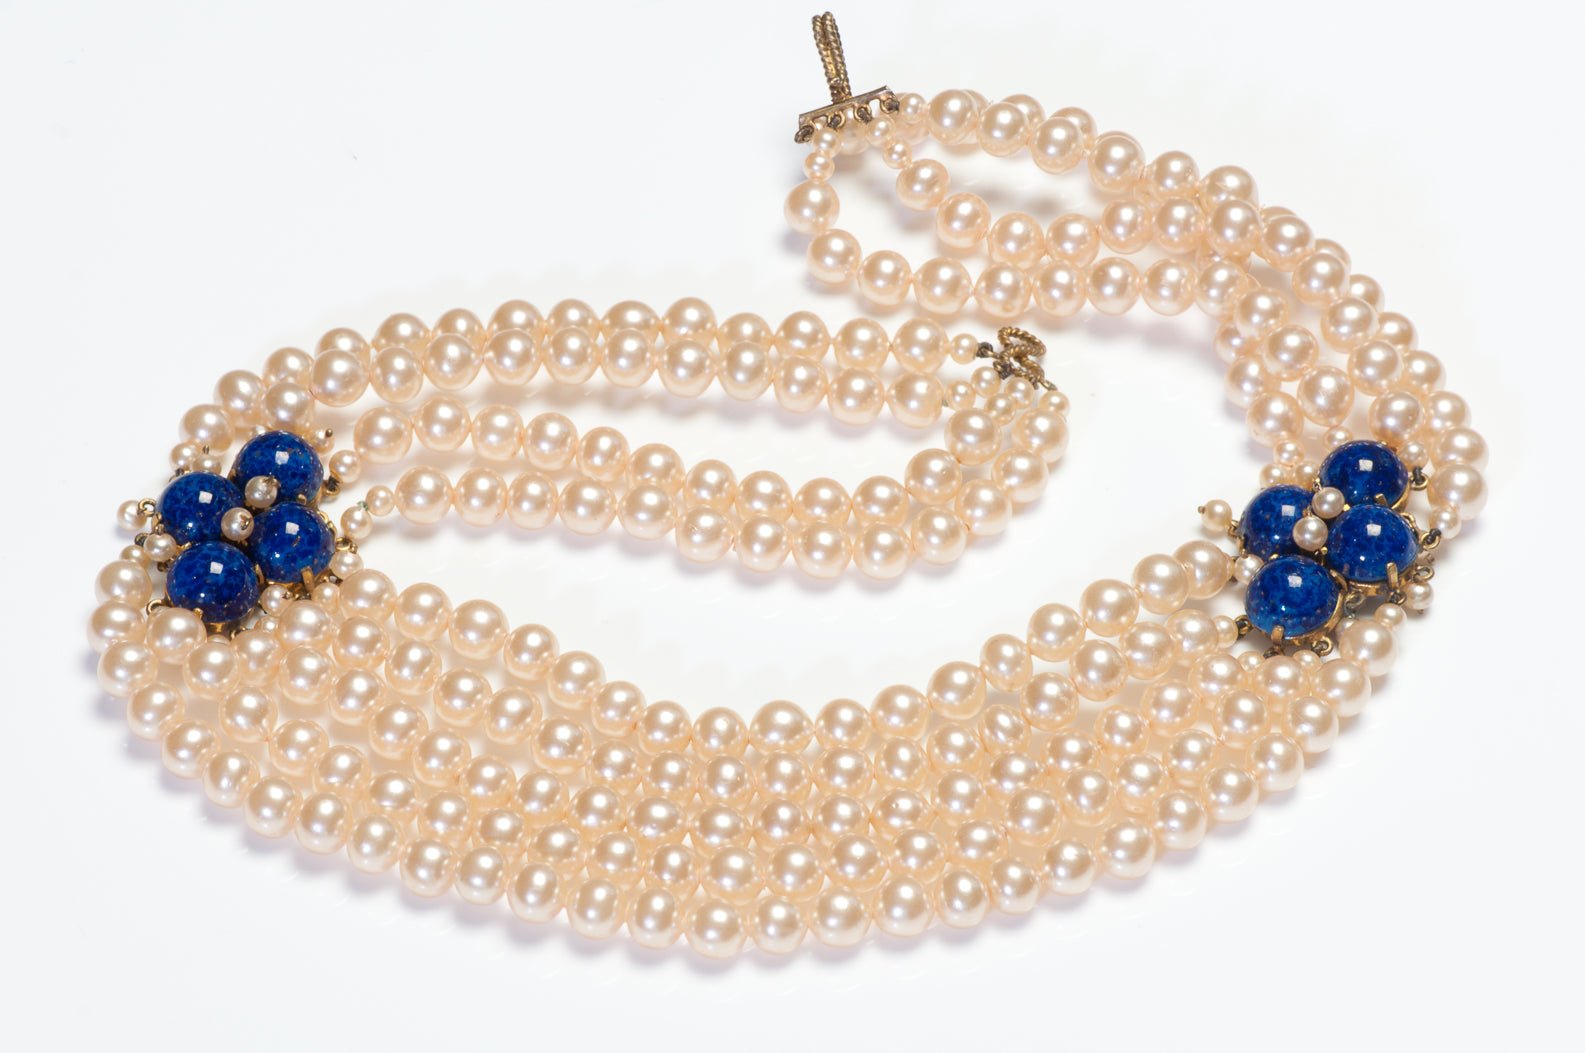 Christian Dior Paris Couture 1950's Blue Cabochon Glass Pearl Collar Necklace - DSF Antique Jewelry